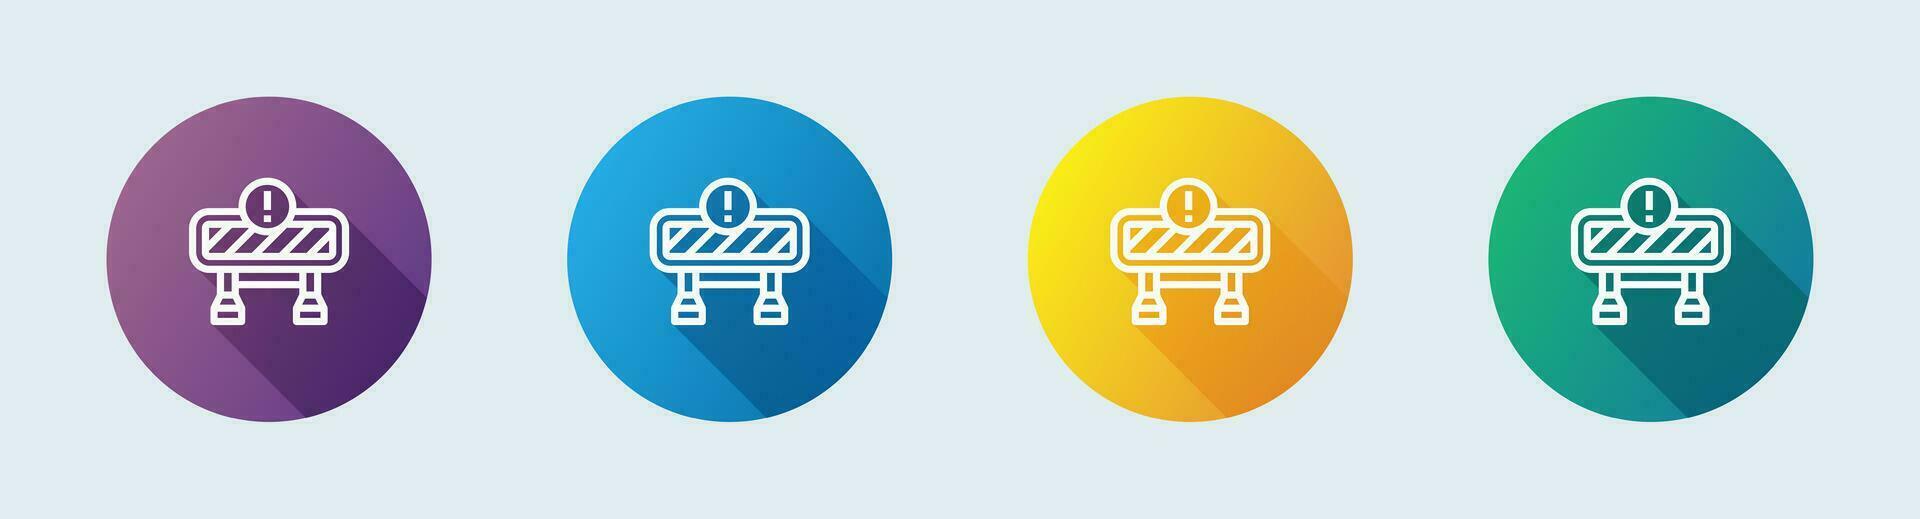 Road block line icon in flat design style. Barrier signs vector illustration.